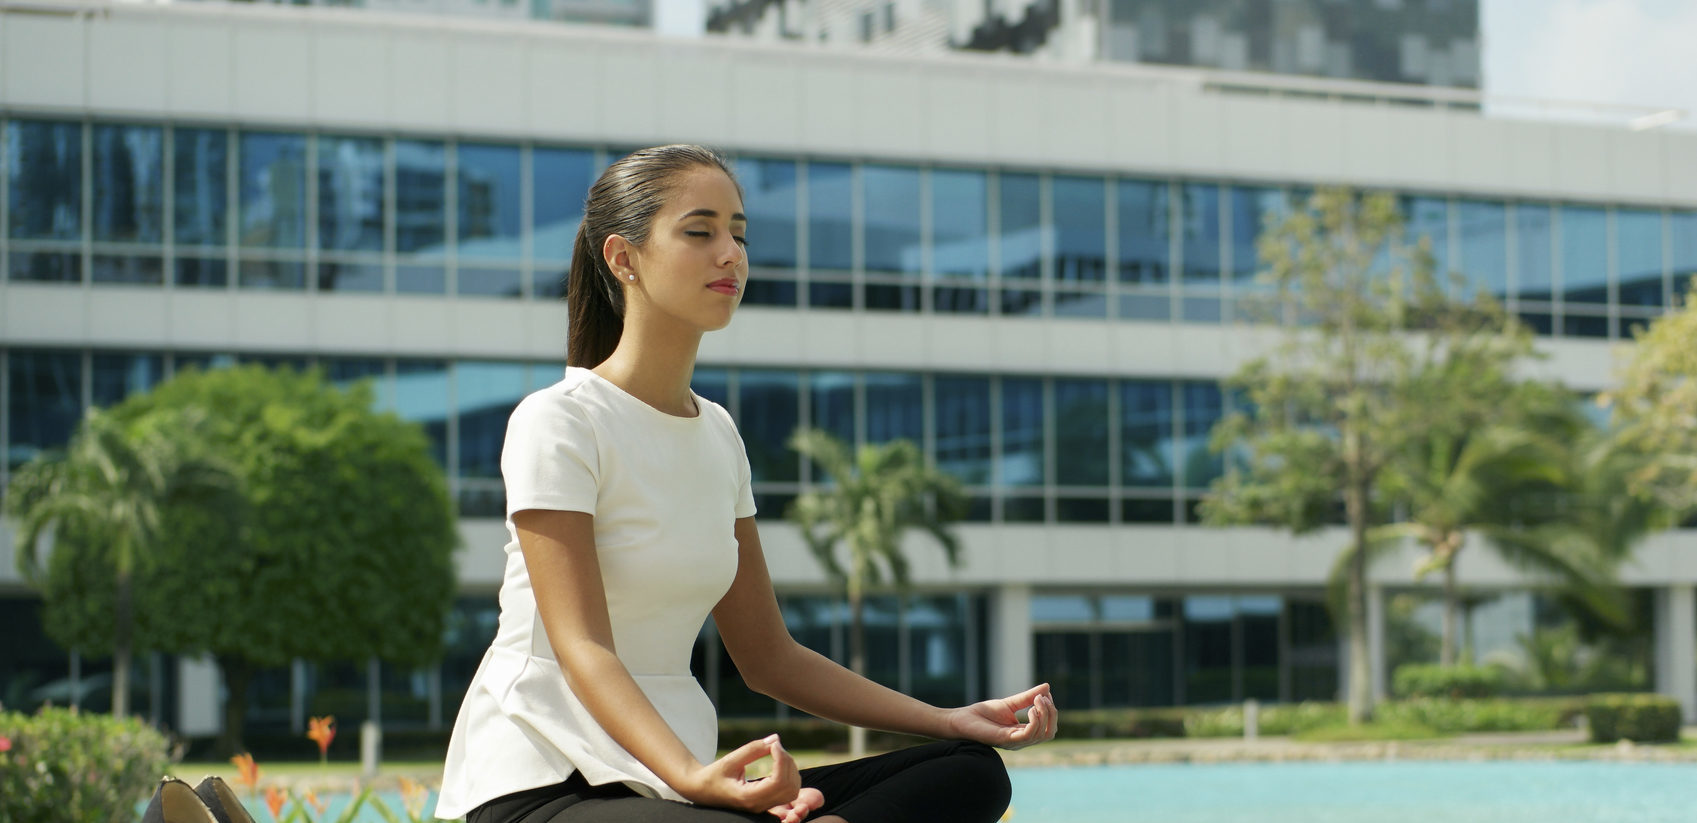 How do I find the best tips in meditation training? 12